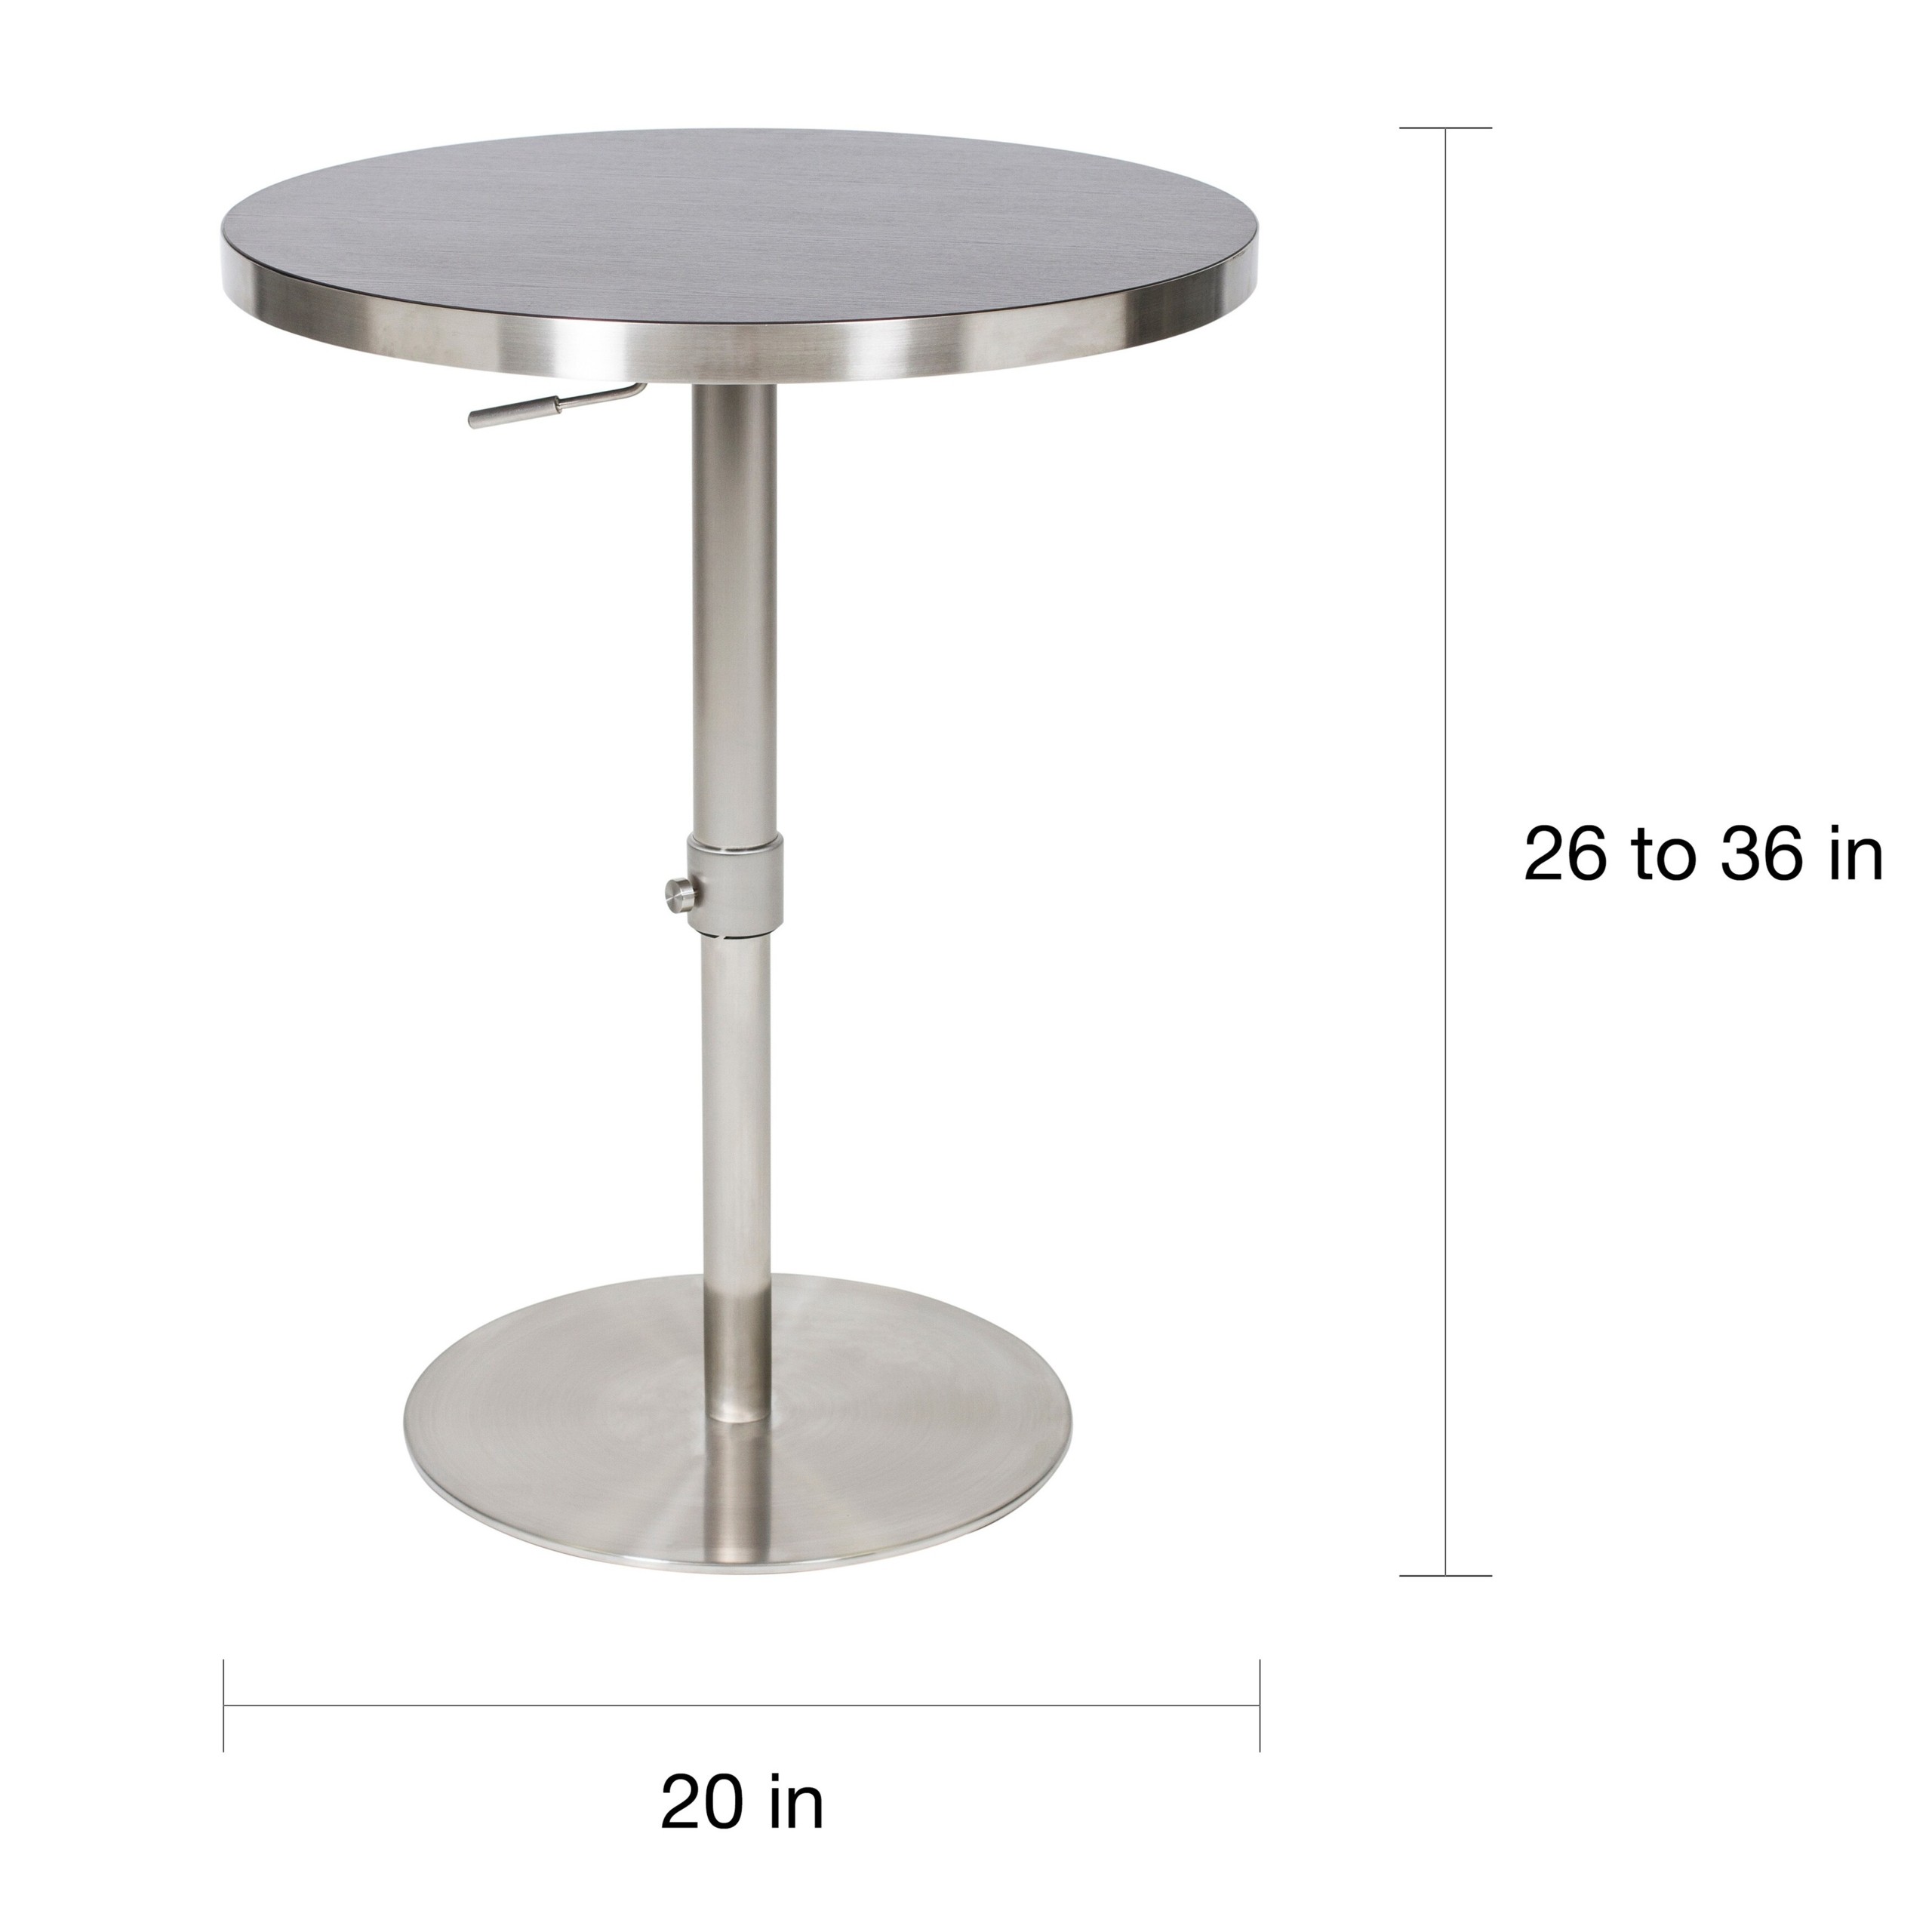 Stainless steel pub table set stainless steel cafe bar